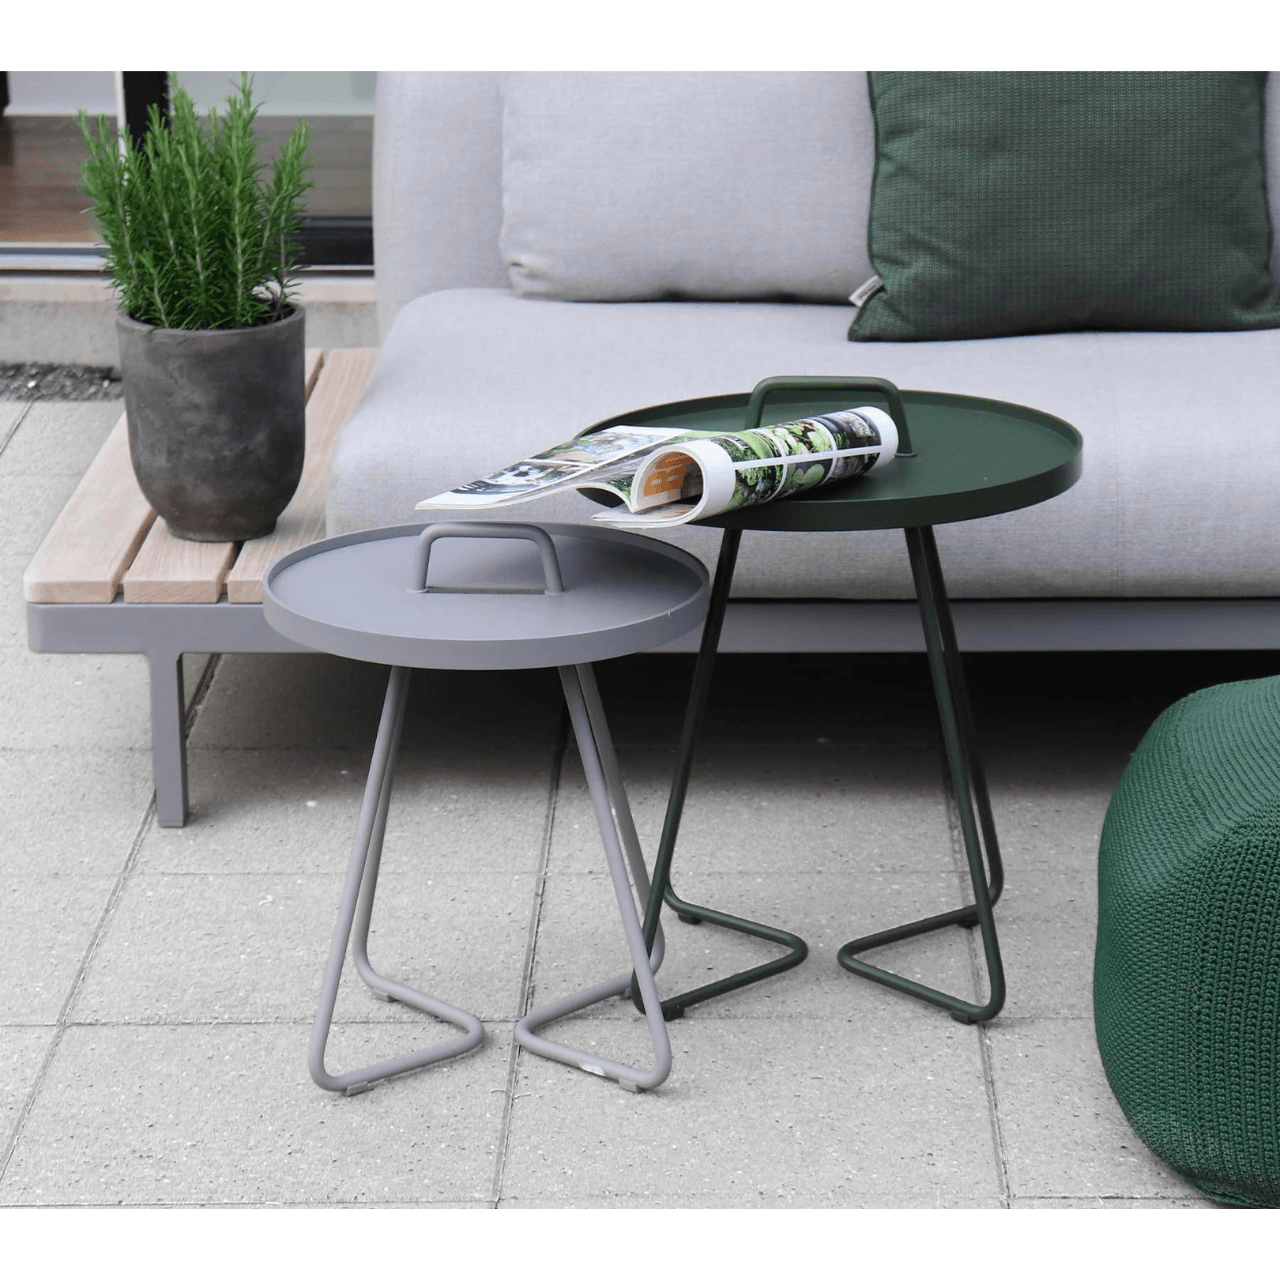 Boxhill's On-the-Move light grey and dark green outdoor round side table beside dark green outdoor fabric footstool in front of light grey couch